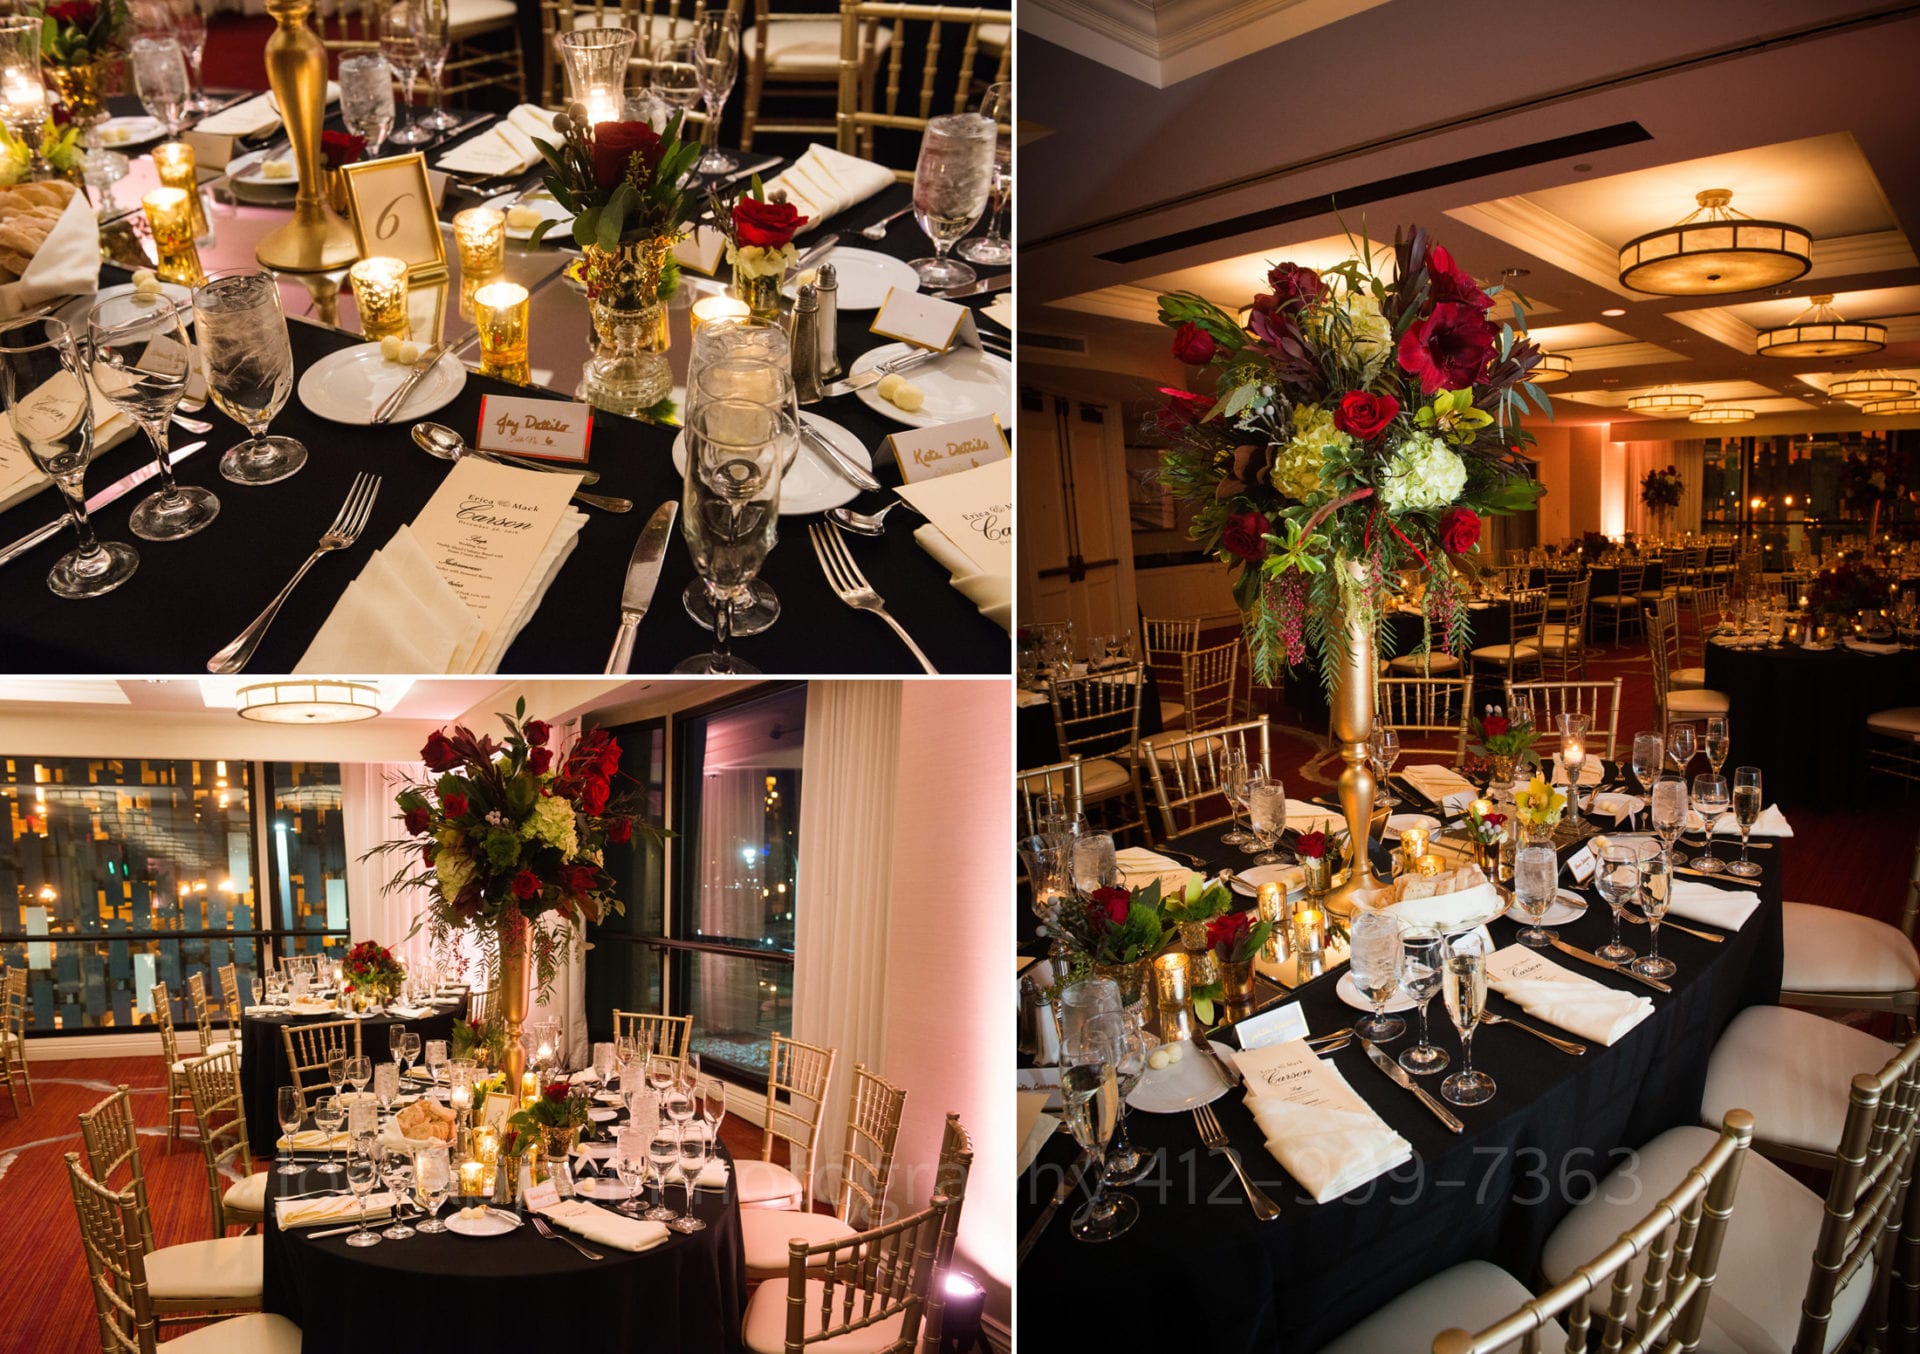 black and white table settings with large red and green floral arrangements